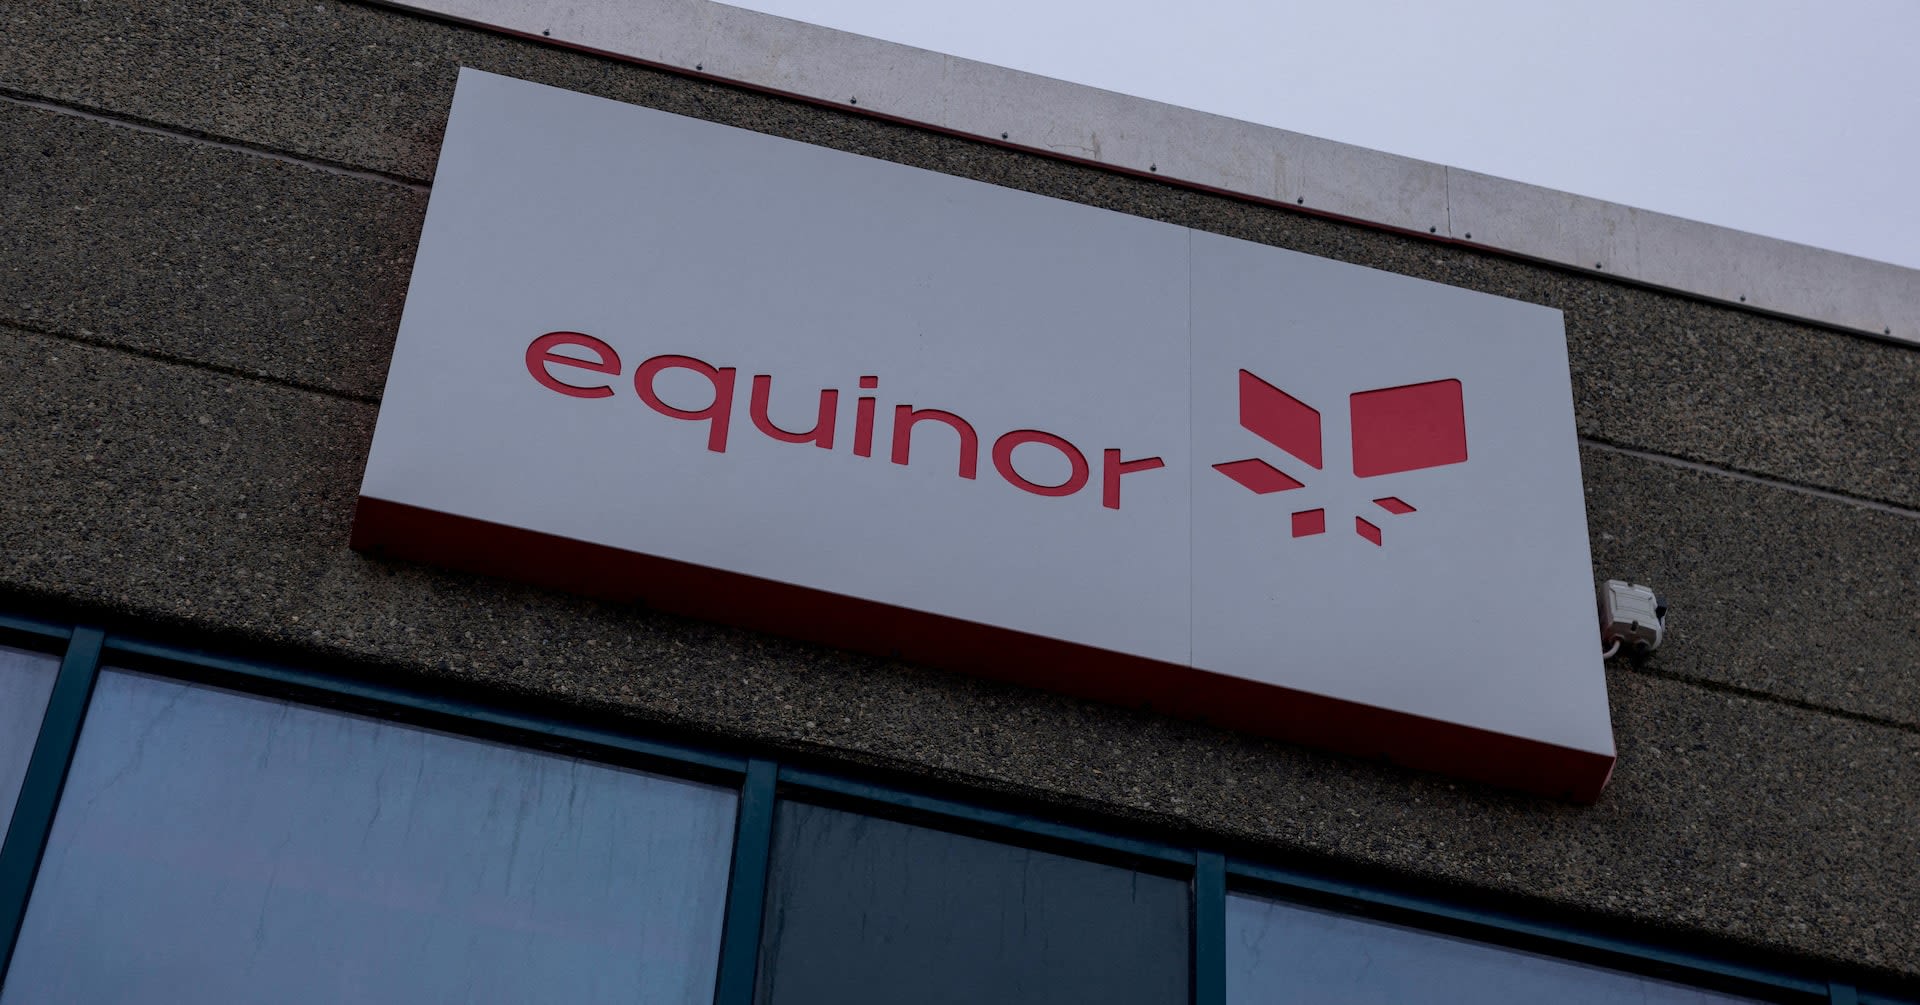 World's energy transition must increase speed, scale, Equinor analysts say